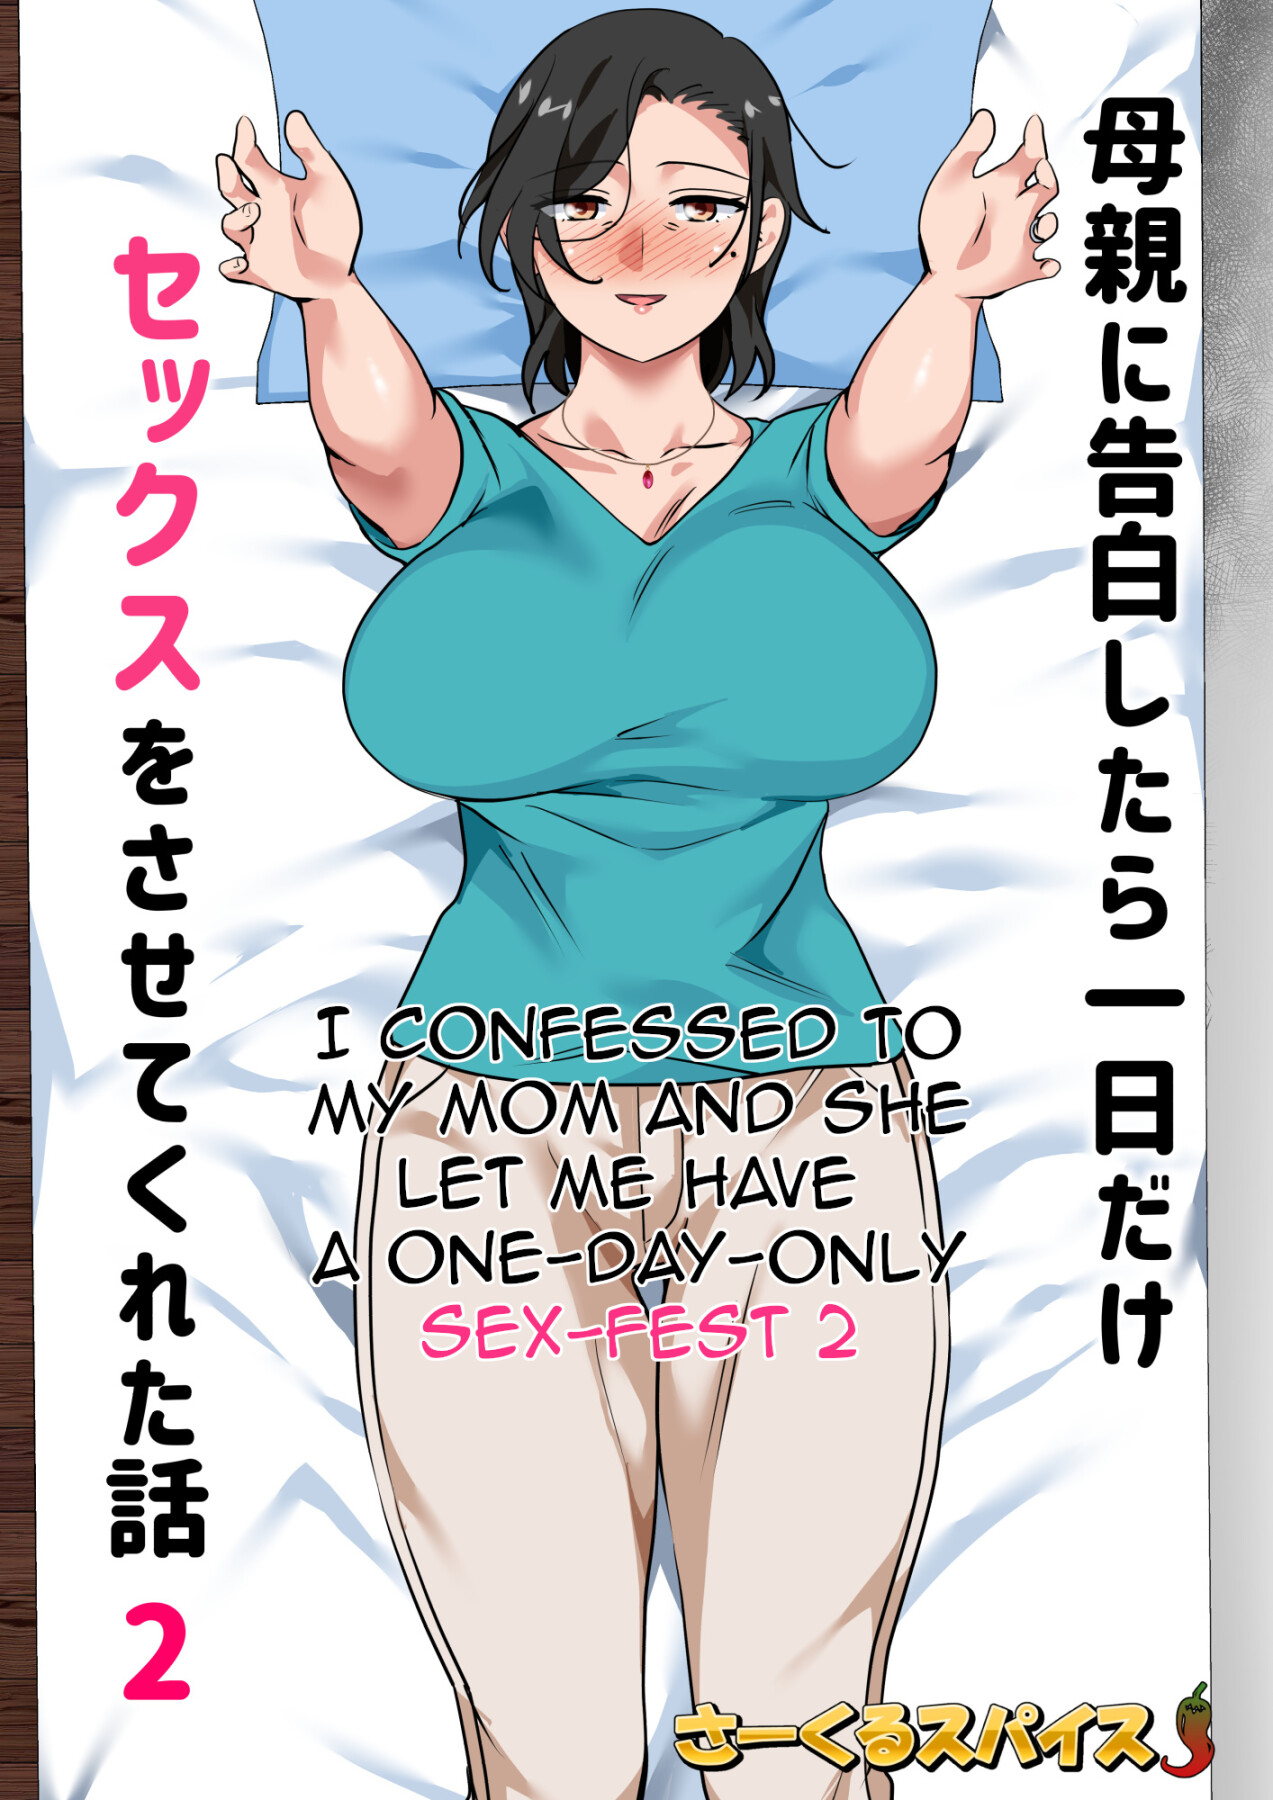 Hentai Manga Comic-I Confessed to My Mom and She Let Me Have A One-Day-Only Sex-Fest 2-Read-2